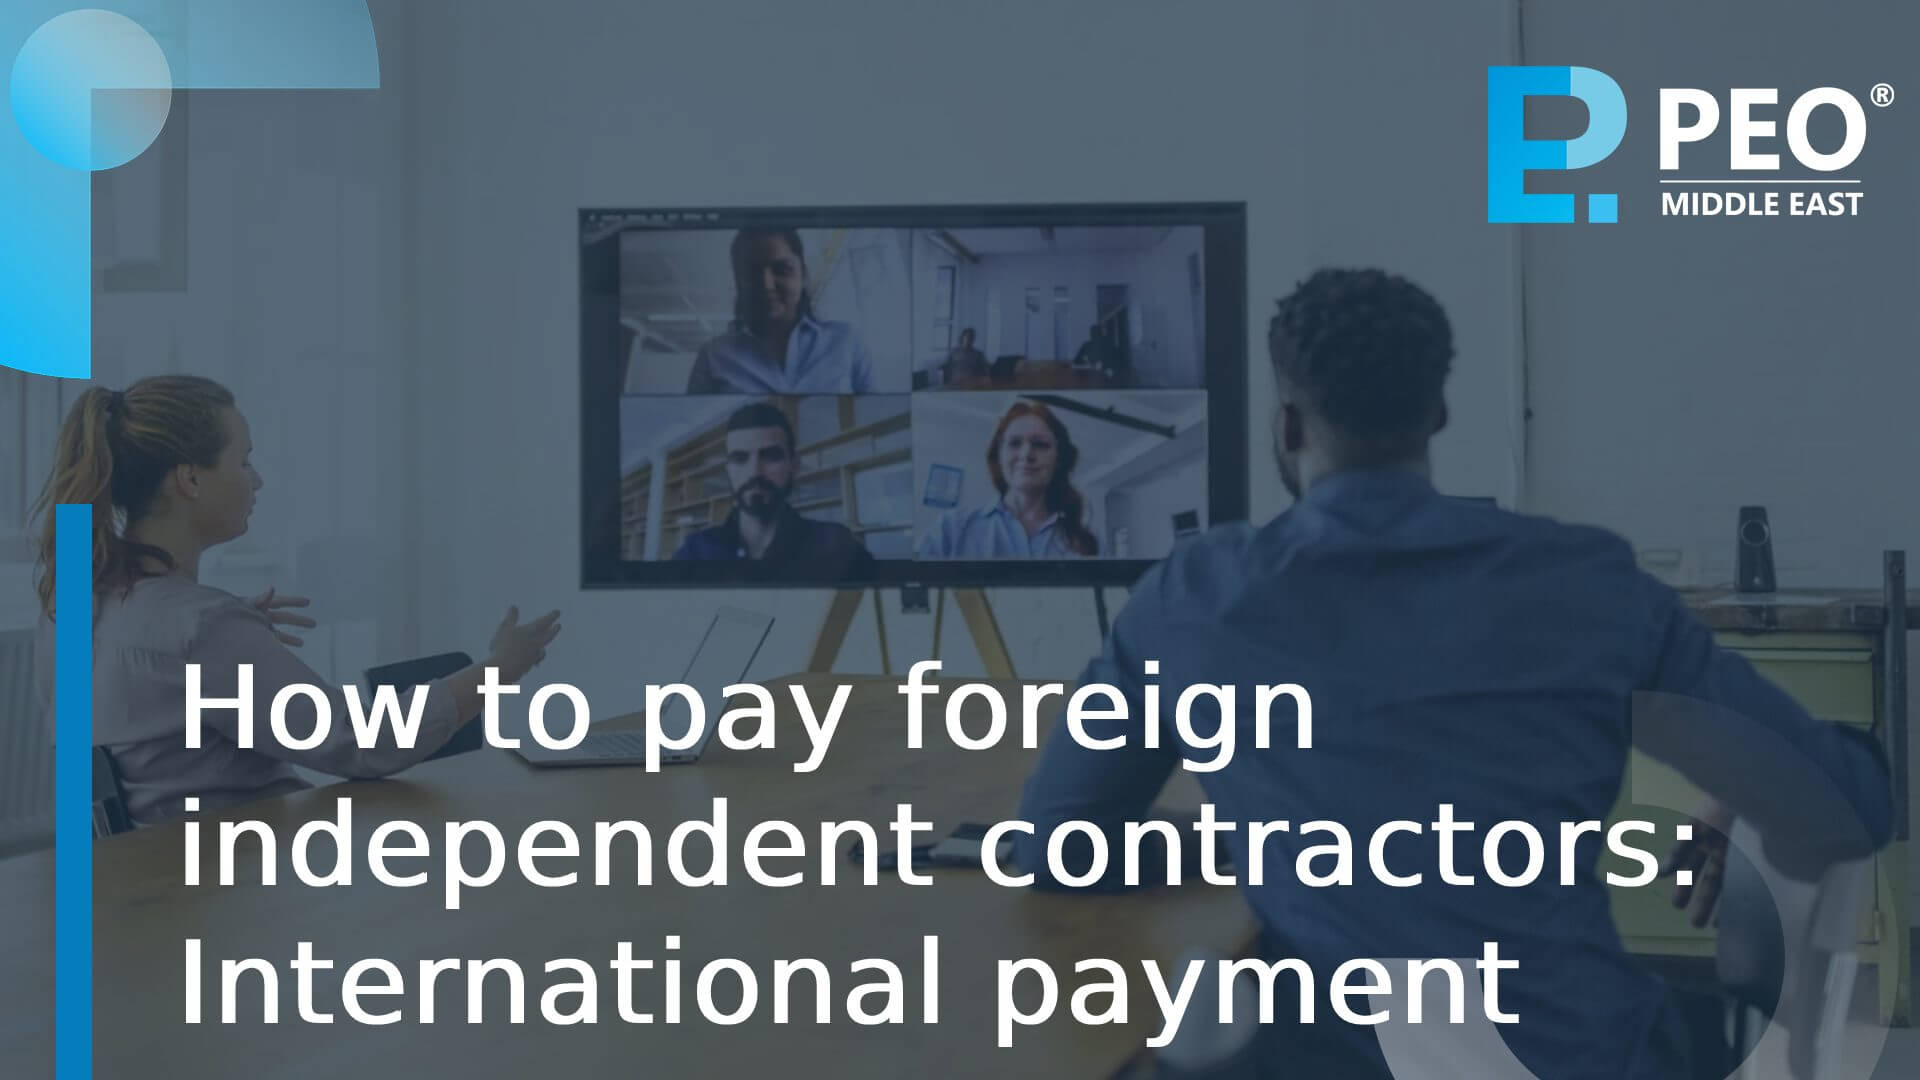 How to pay foreign independent contractors: International payment